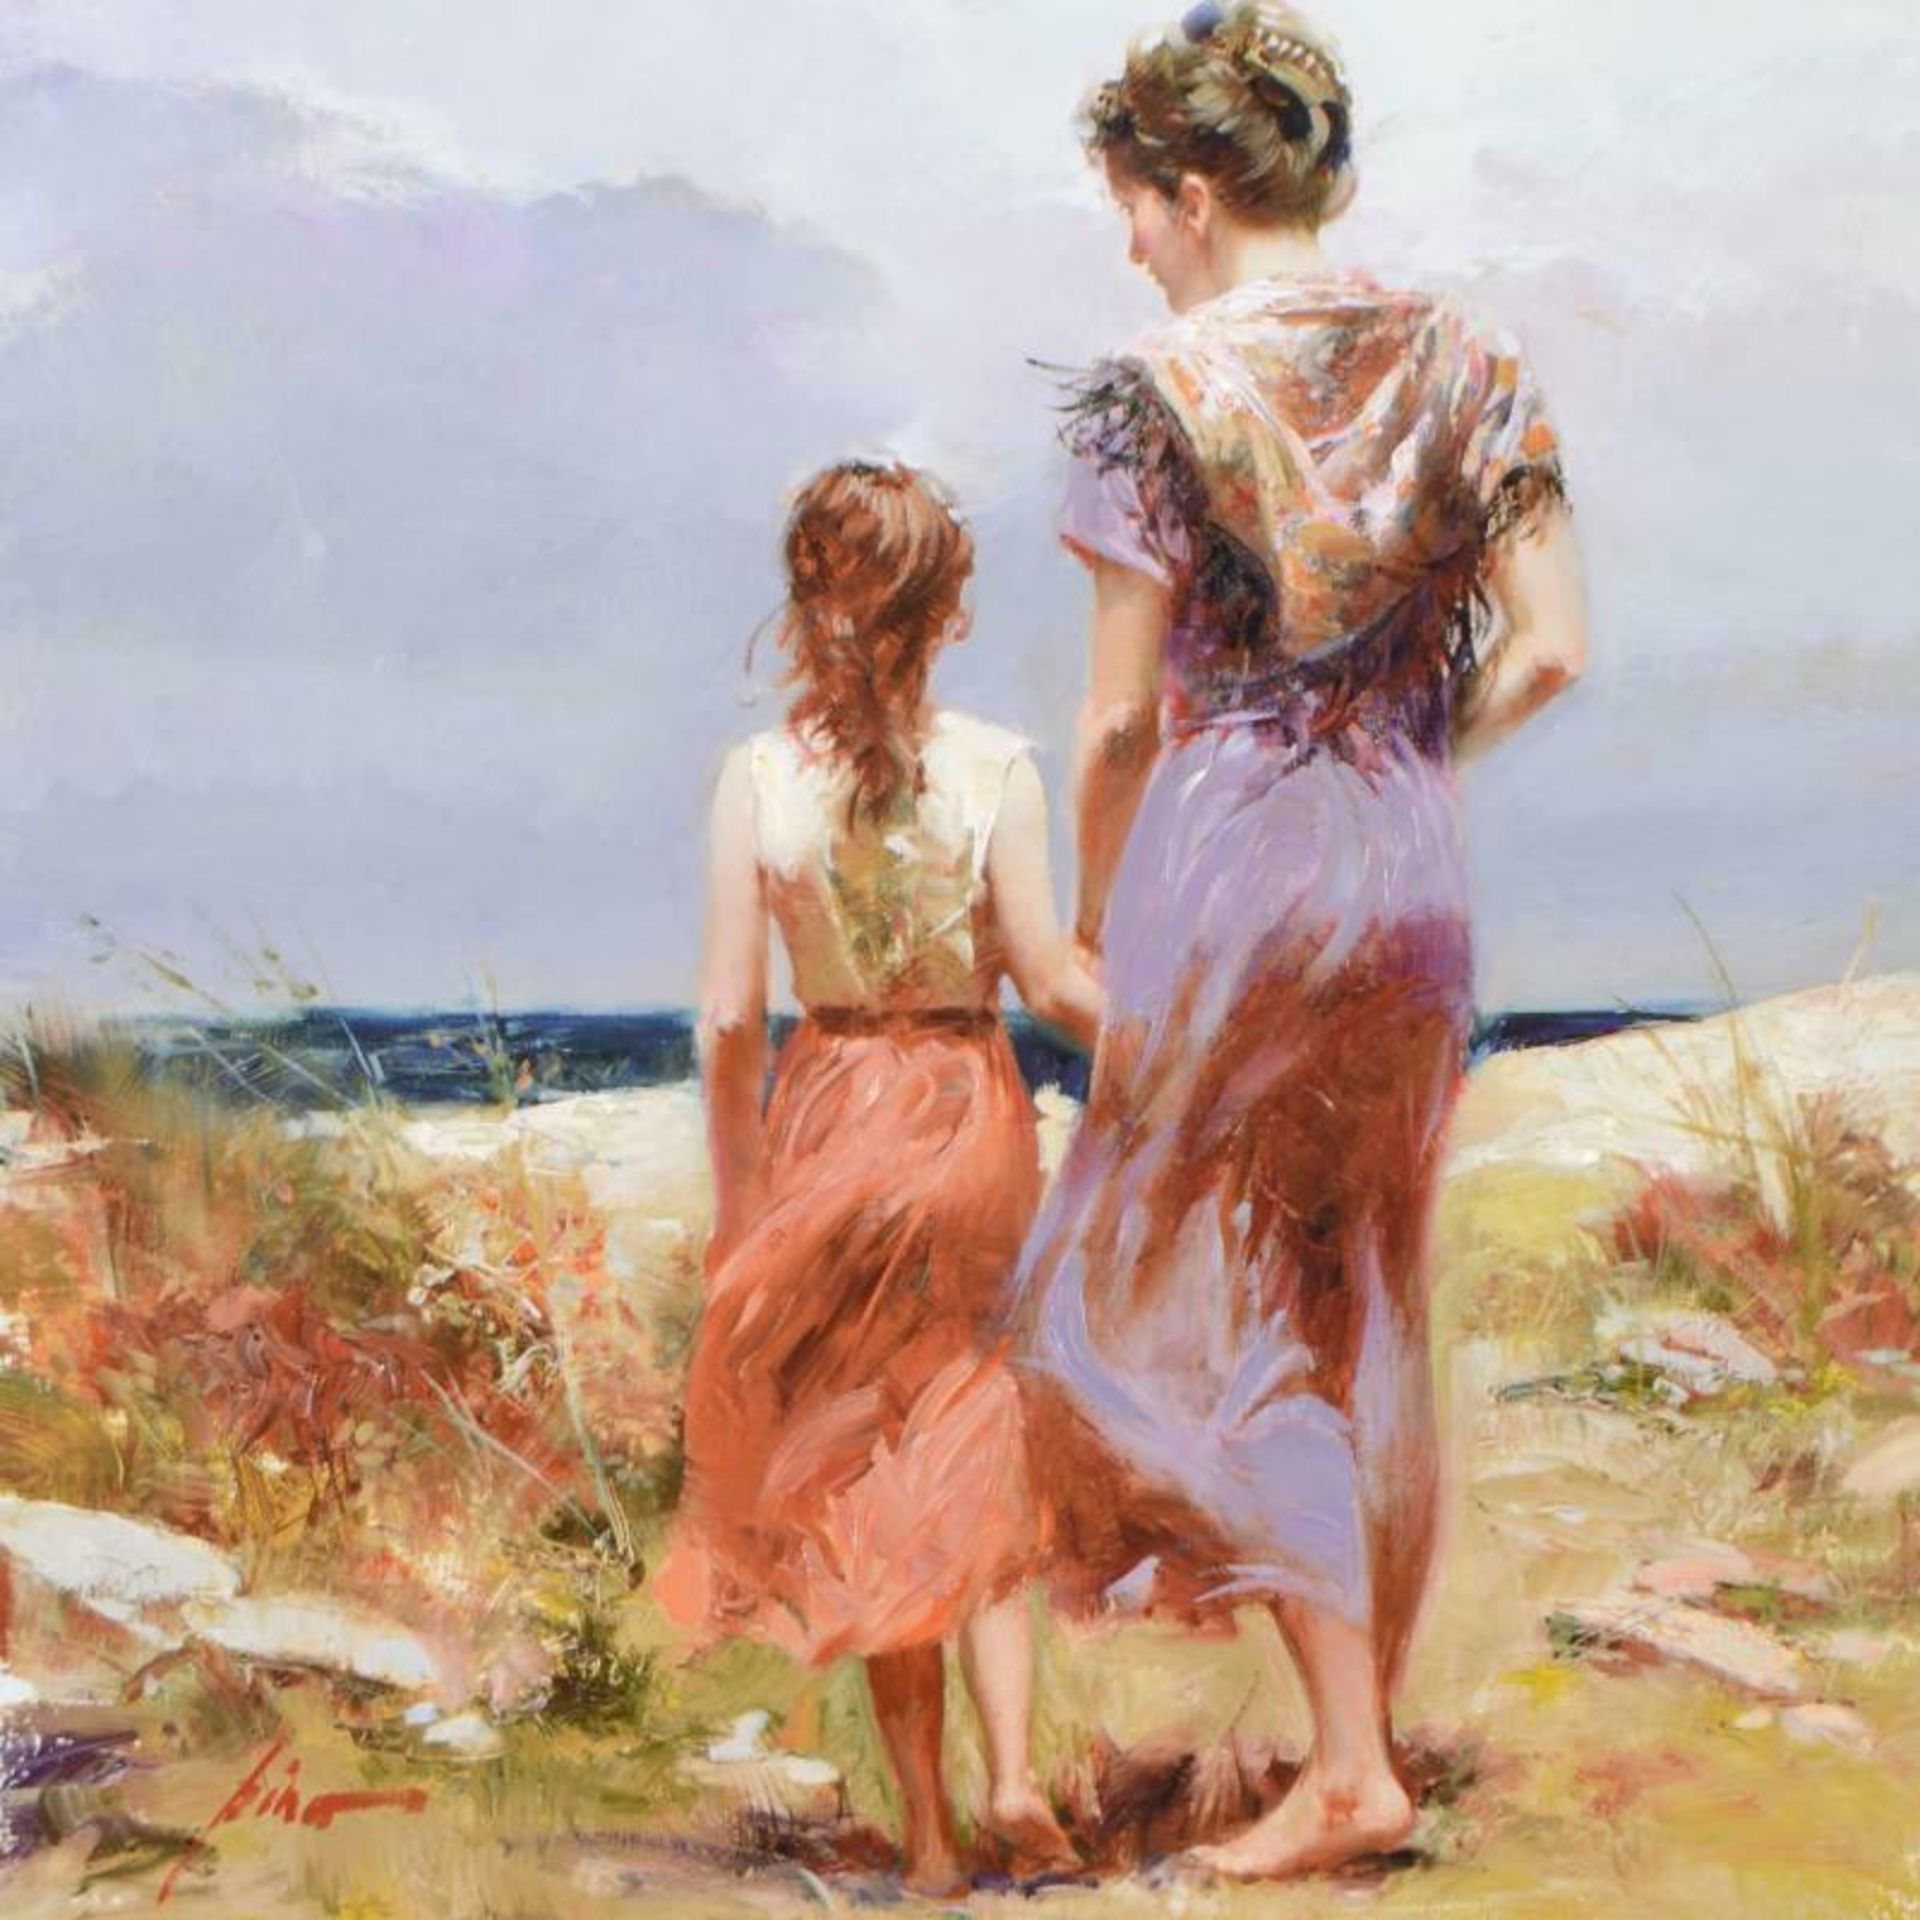 Summer Afternoon by Pino (1939-2010) - Image 2 of 2